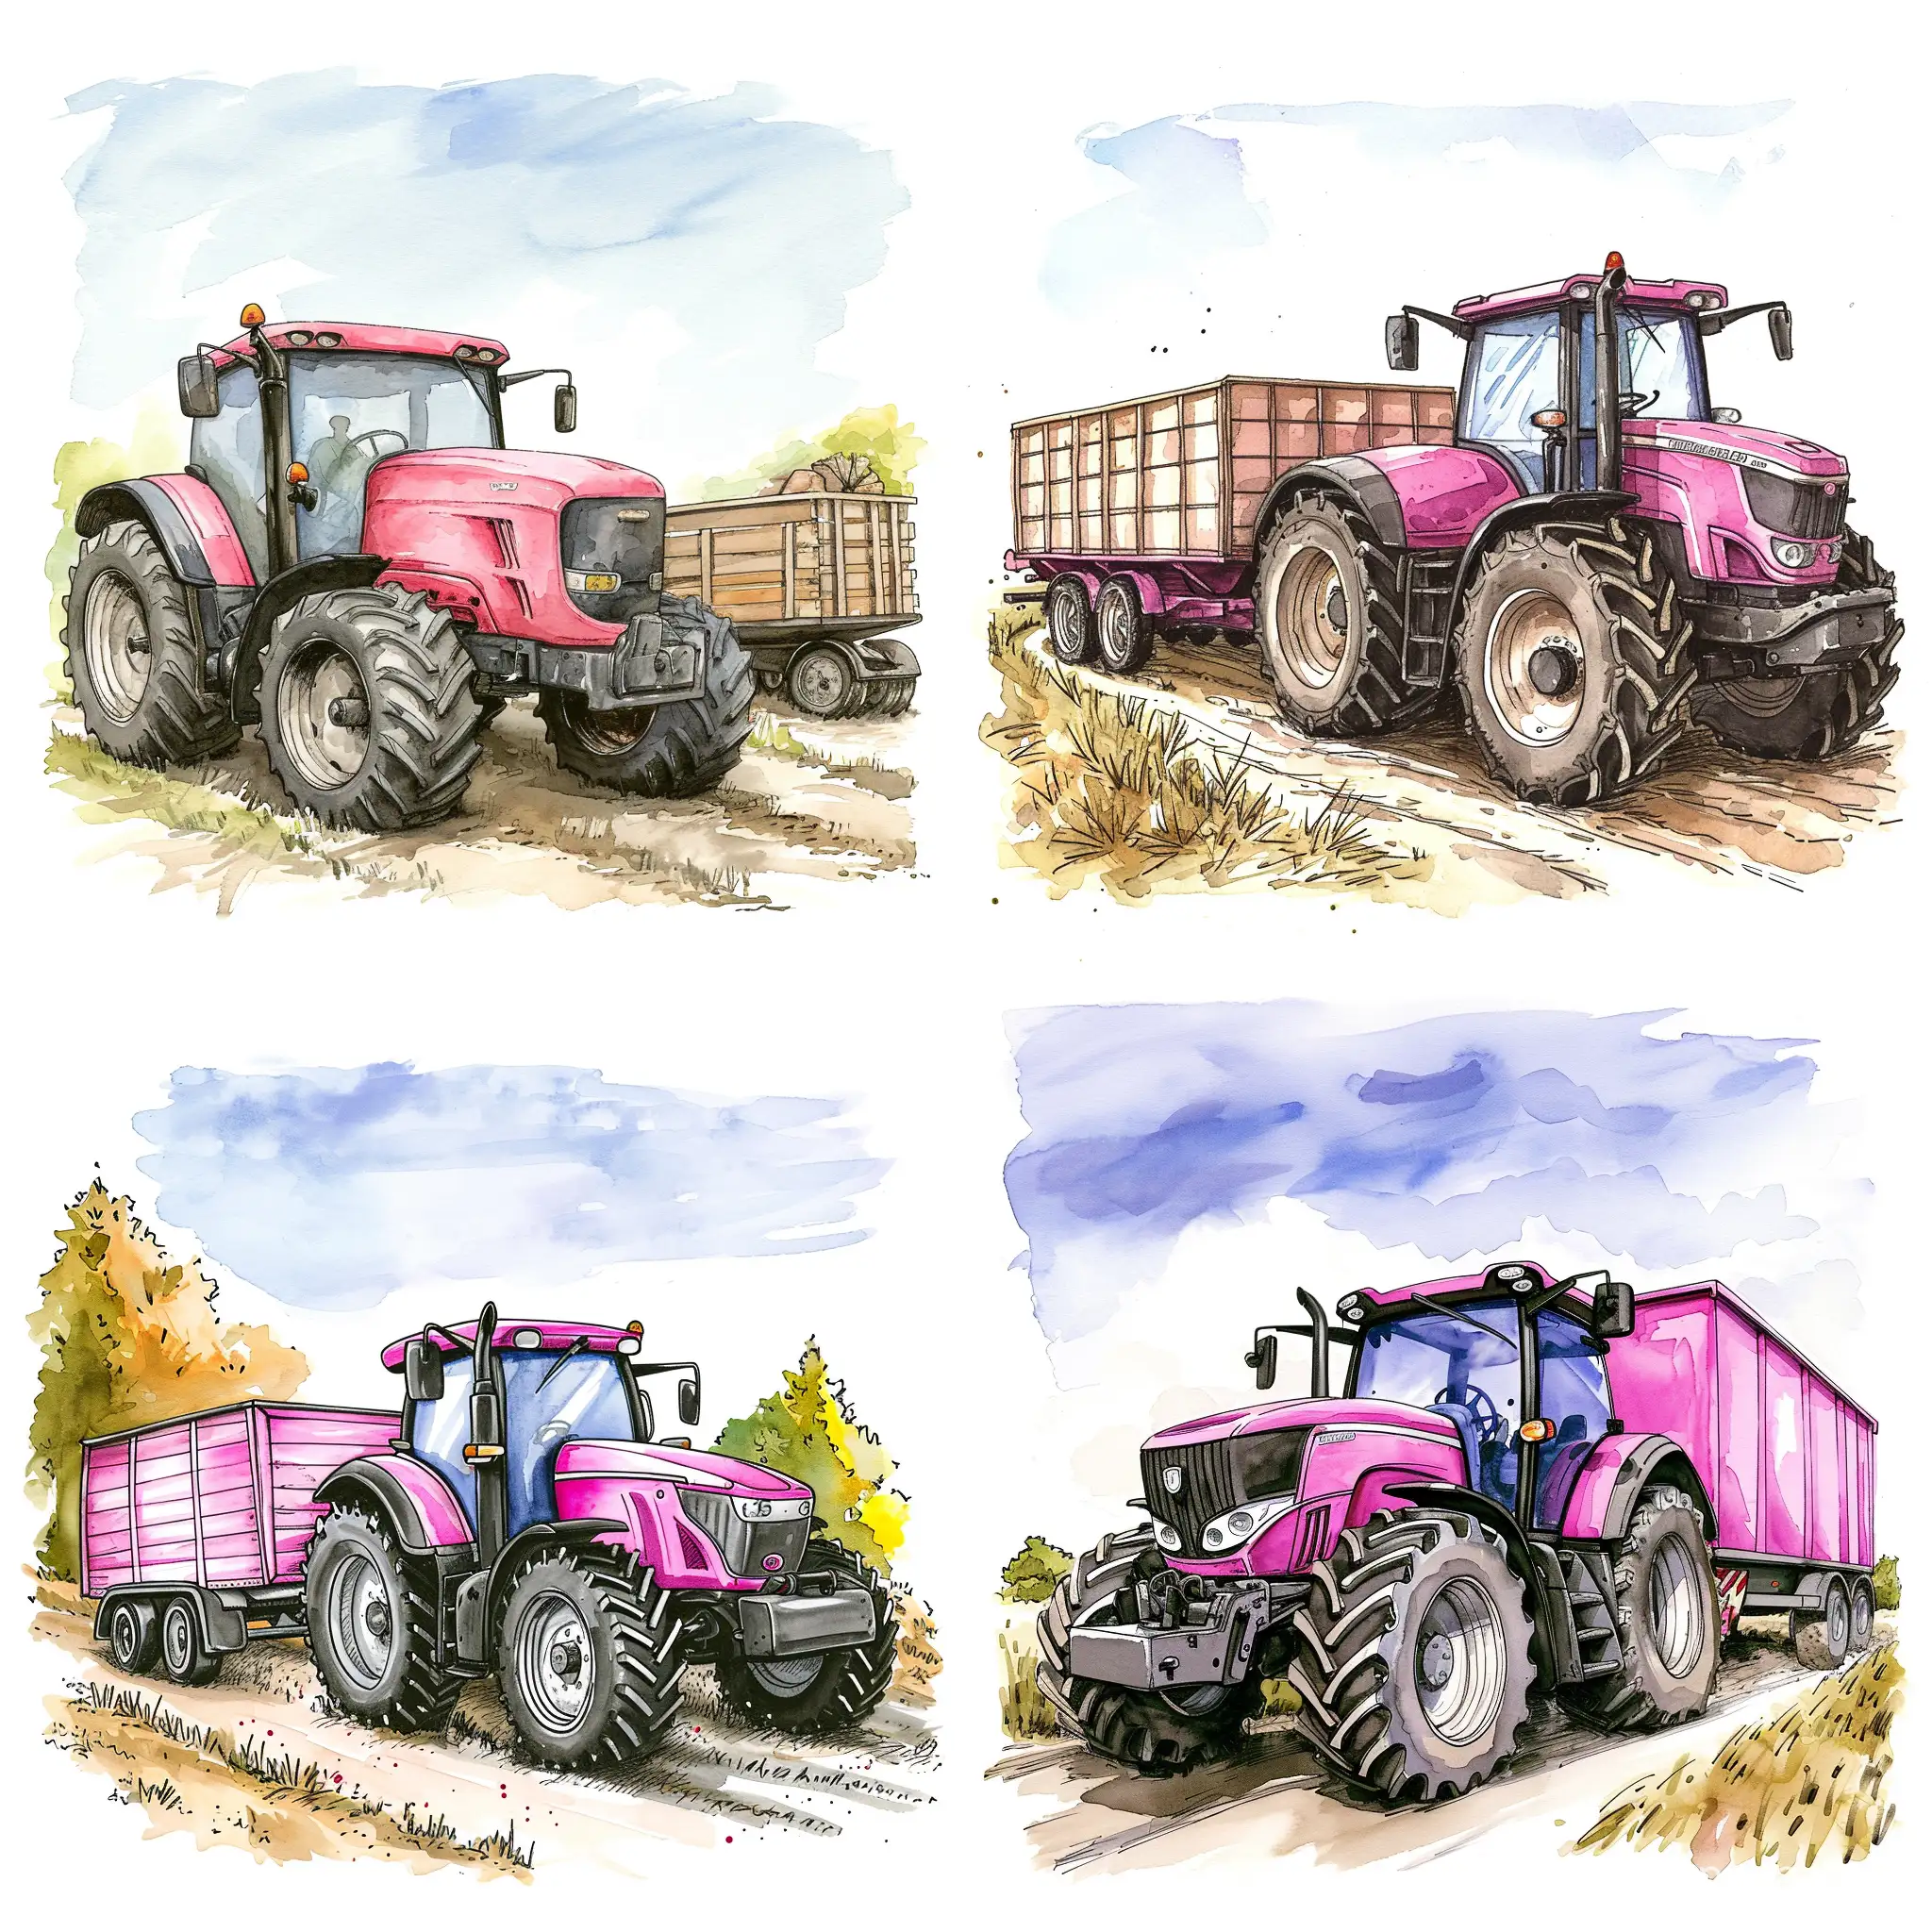 horizontal form, Child-drawn style watercolor illustration of A tractor with trailer pink. The scene is complemented amateur with farm theme, not to much stuff in background